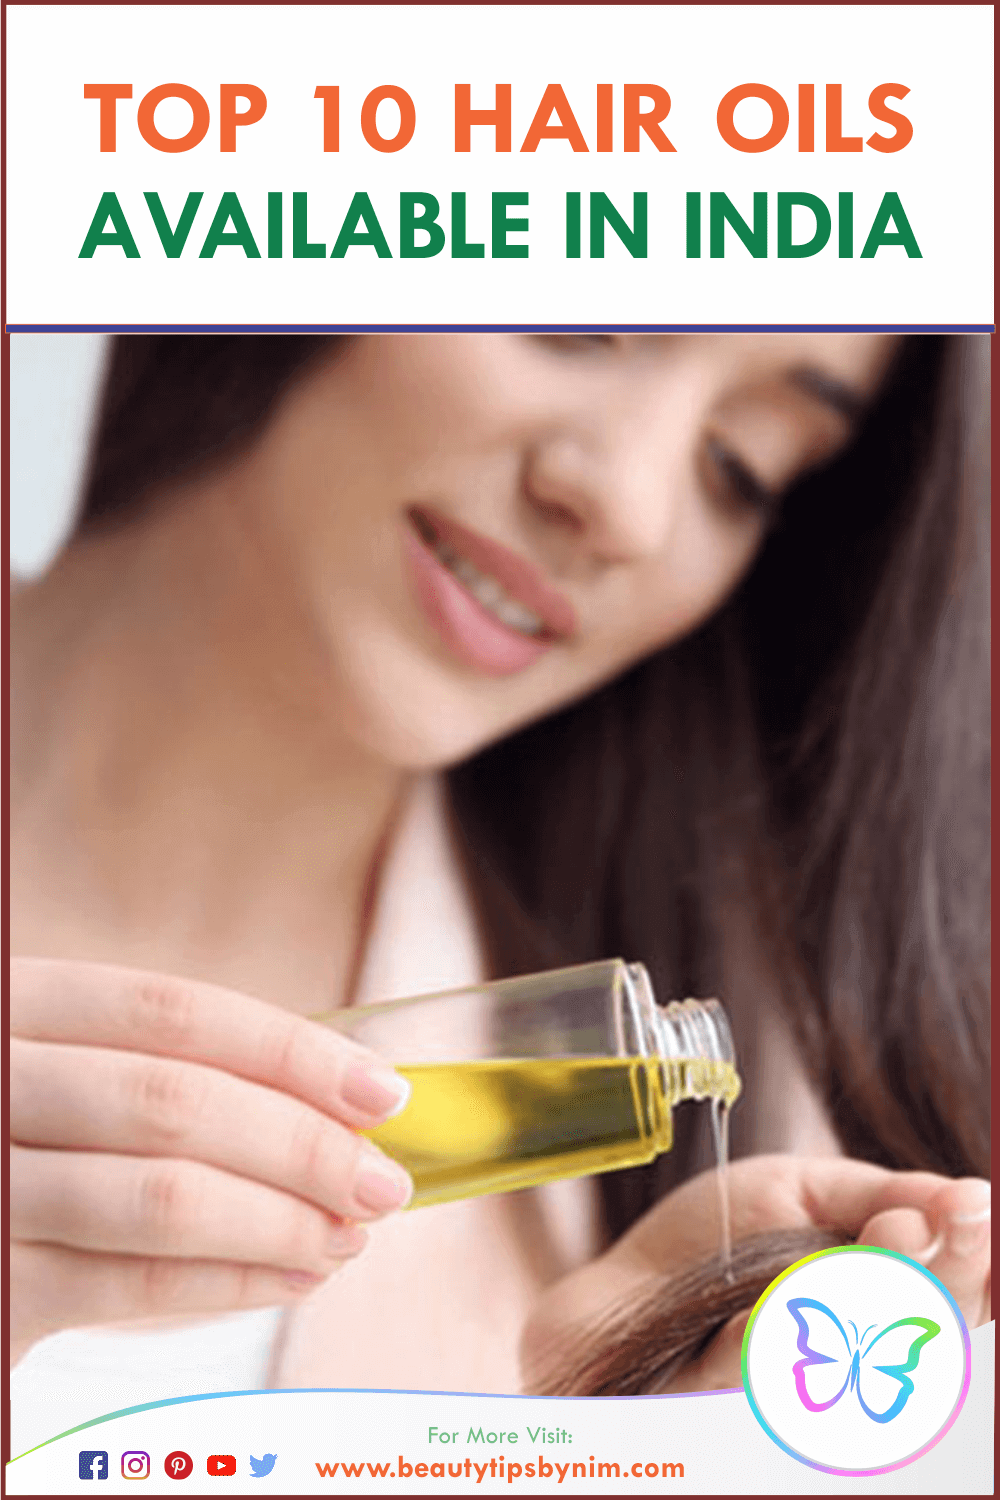 Top 10 Hair Oils in India for Healthier Hair in 2021 - Beauty Tips By Nim - Nimisha Goyal - HashBUGS - BTN - Nimify Beauty - beautytipsbynim.com